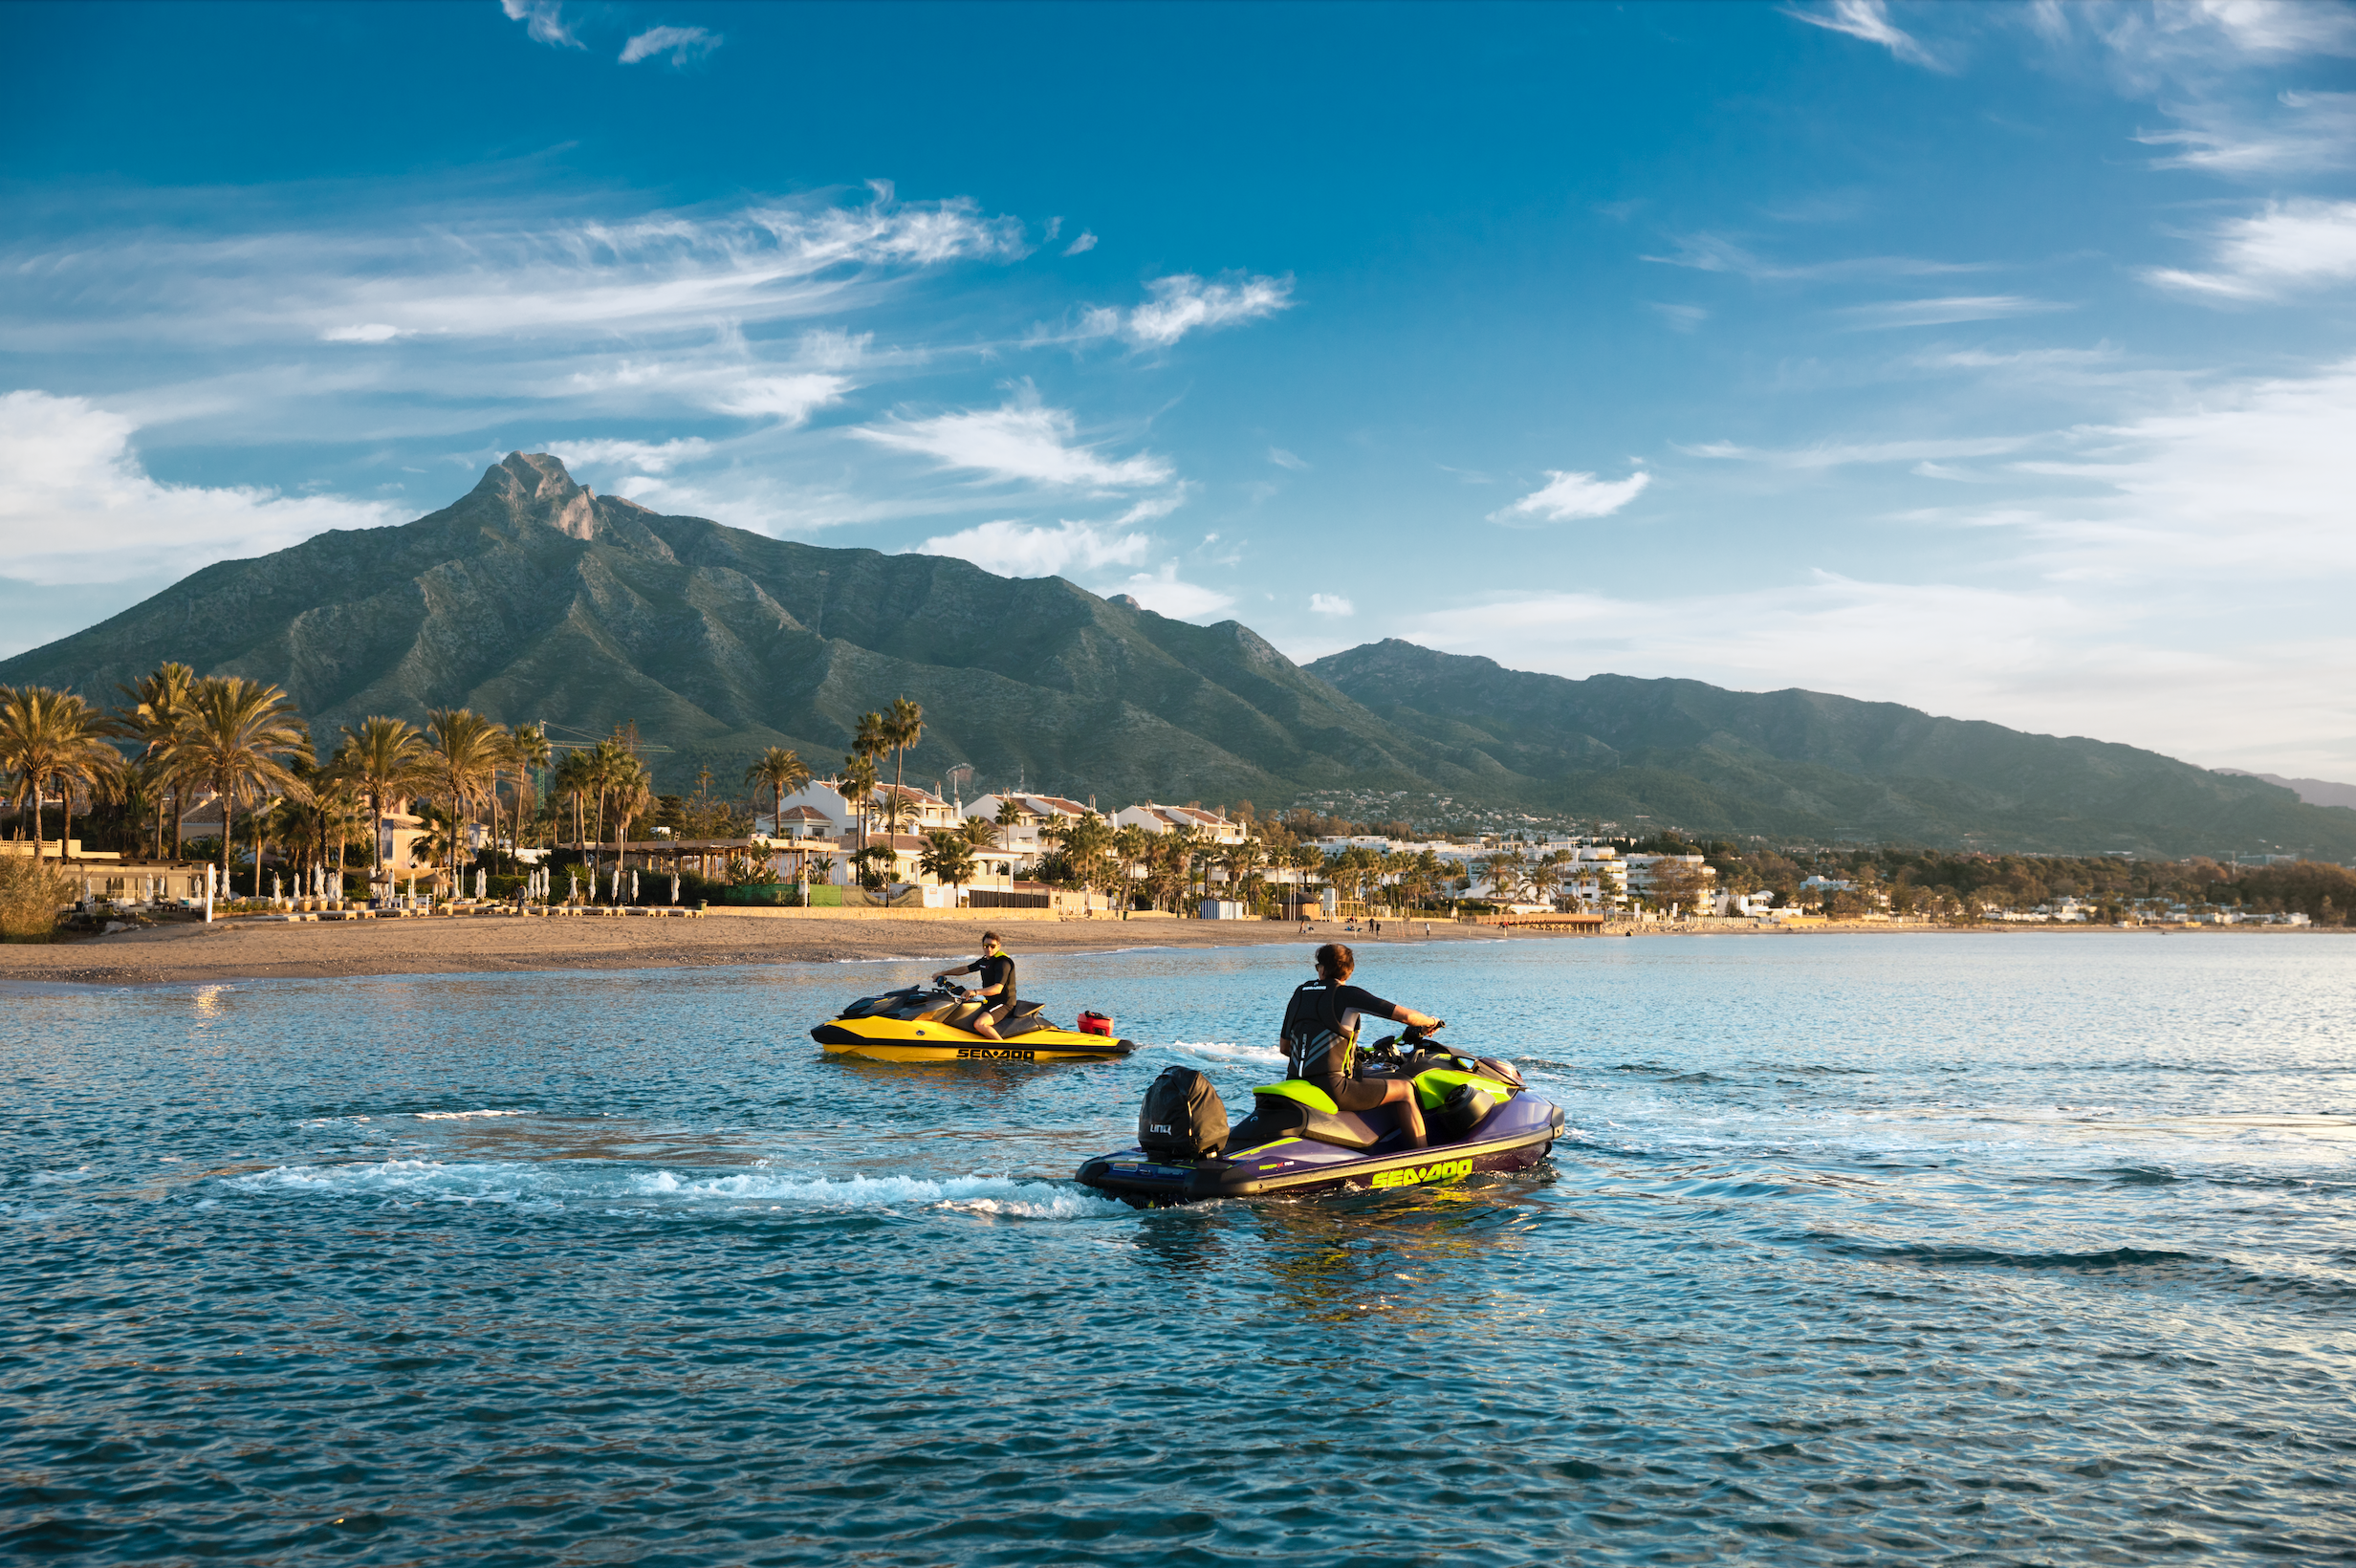 LET’S GET YOUR SEA-DOO READY TO HIT THE WATER!